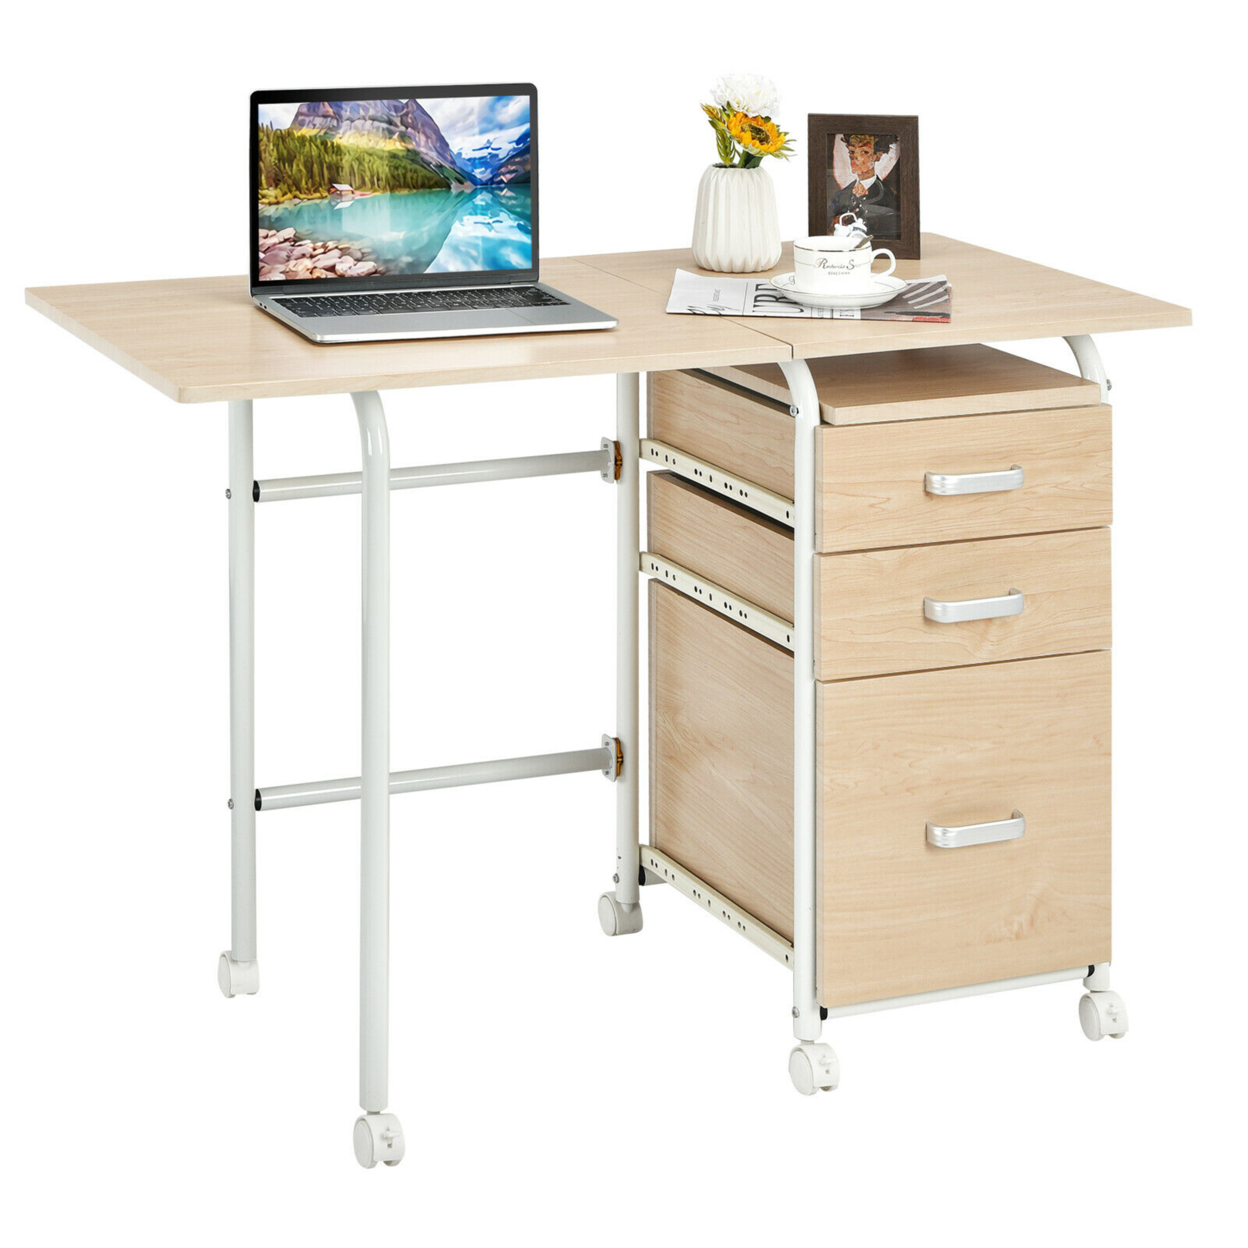 Folding Computer Laptop Desk Wheeled Home Office Furniture With 3 Drawers